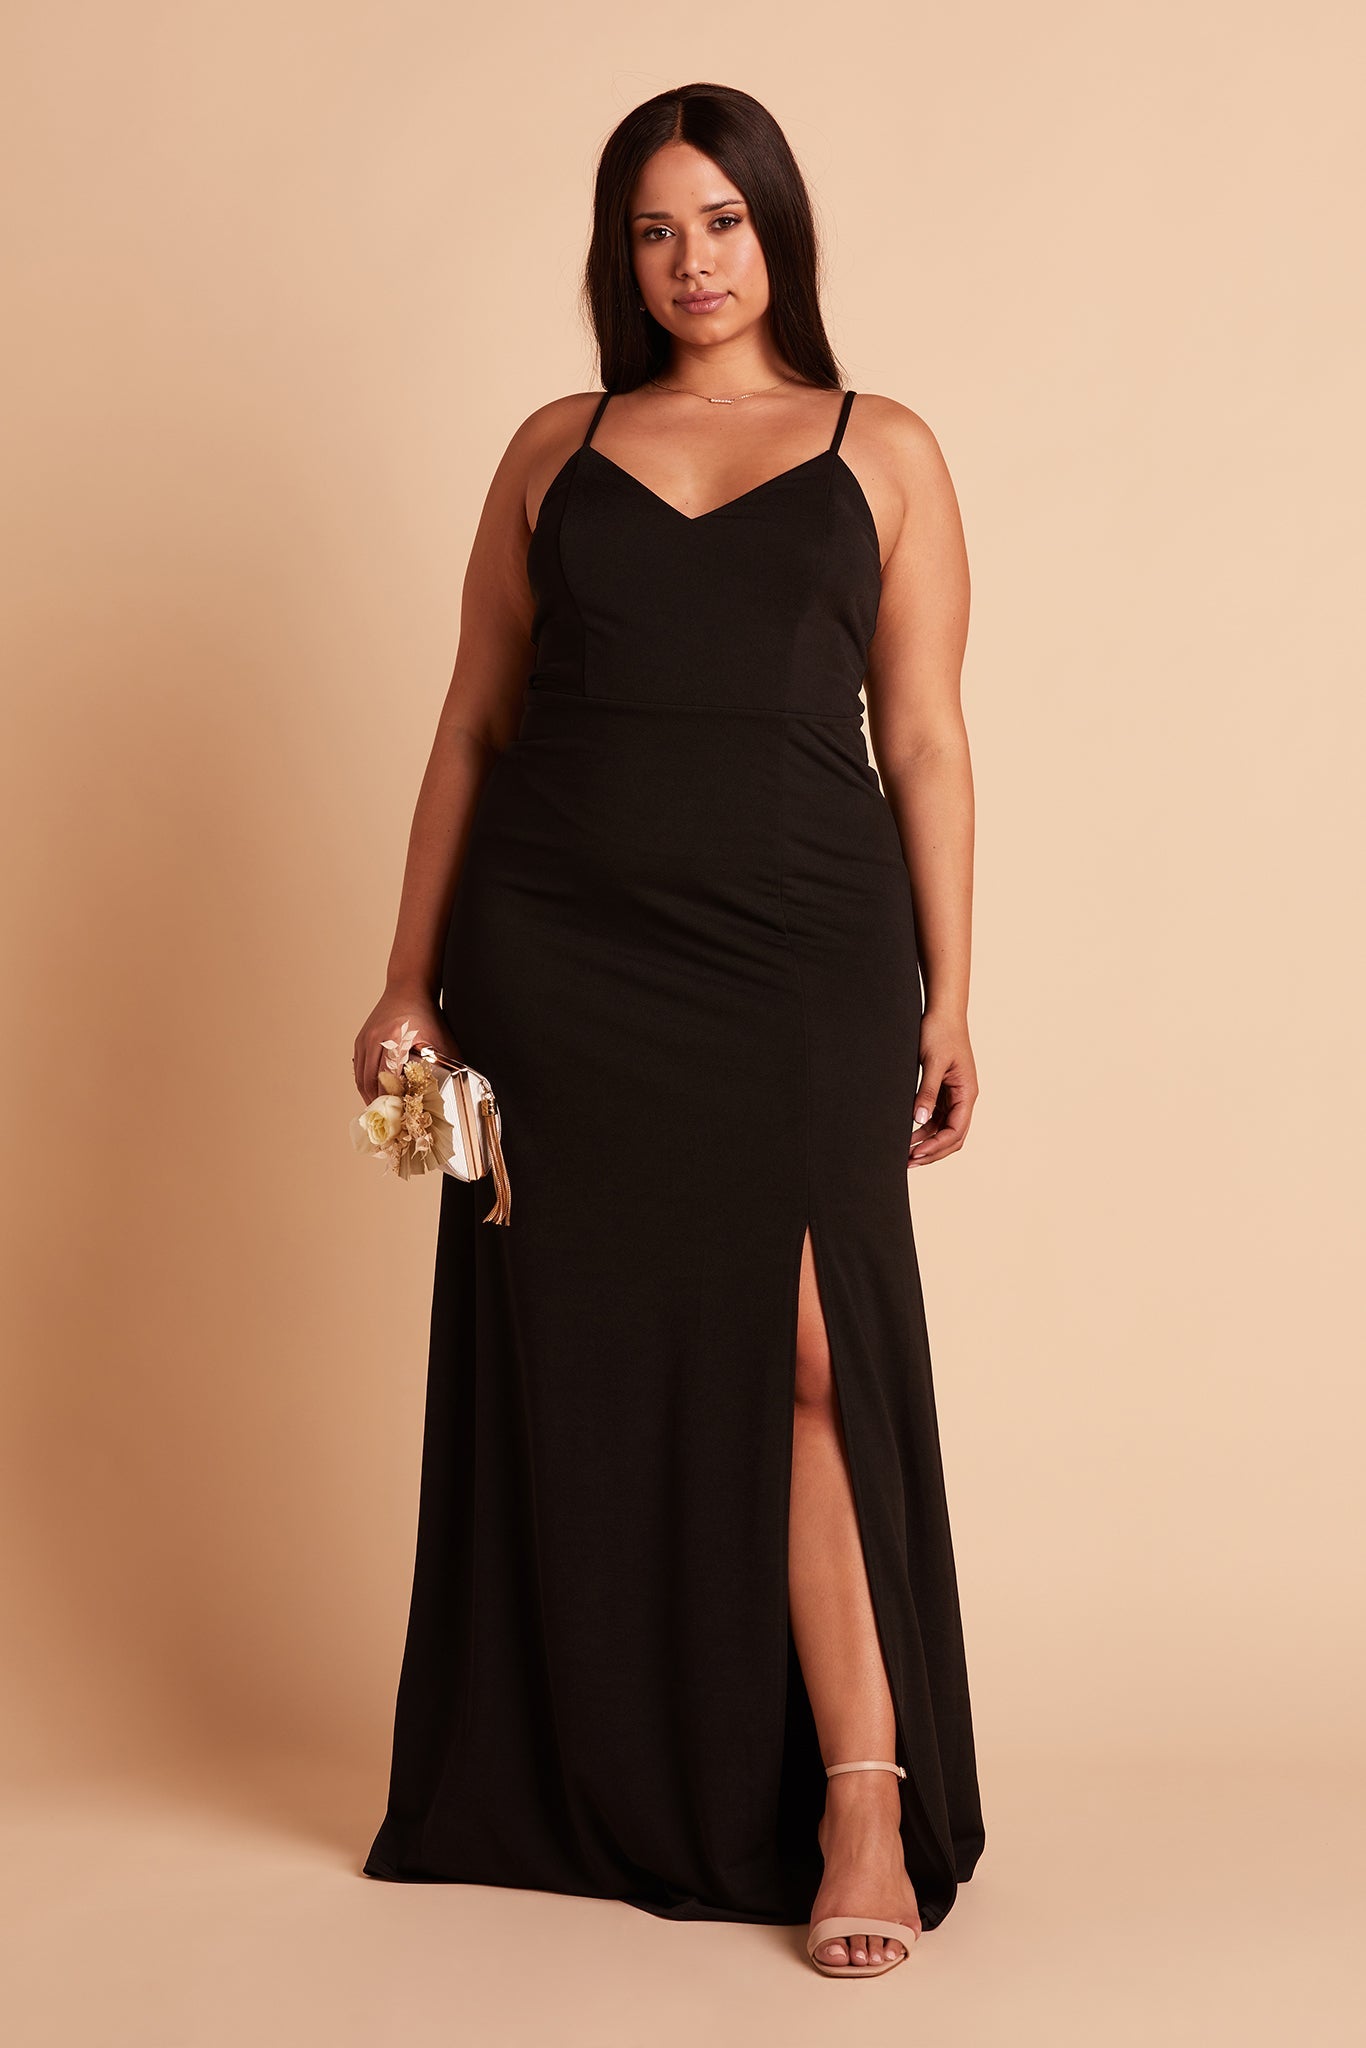 Jay plus size bridesmaid dress with slit in black crepe by Birdy Grey, front view